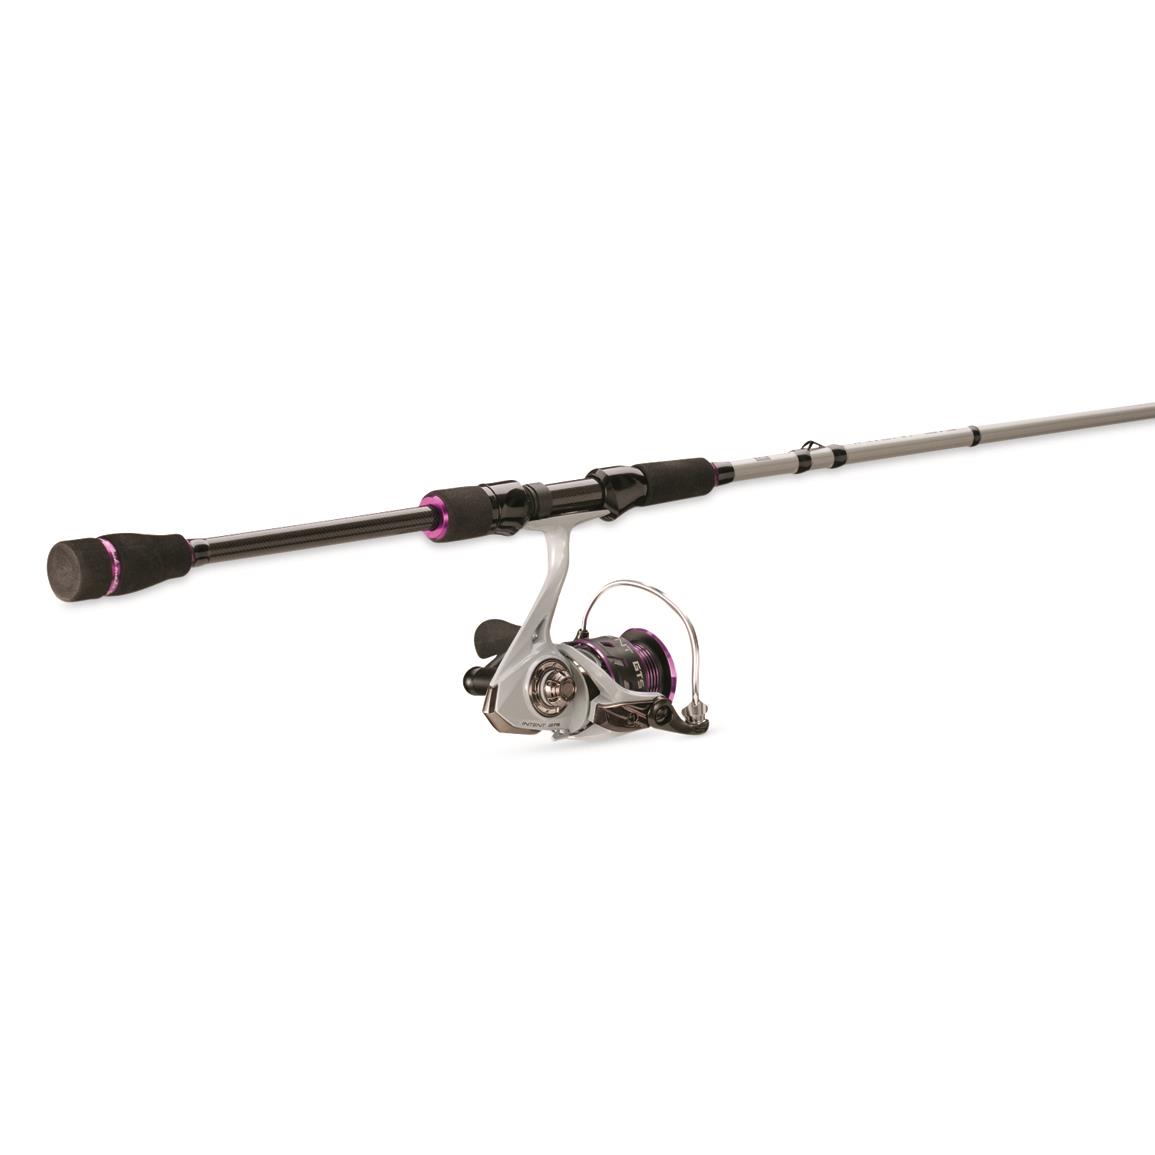 Ugly Stik Bigwater Spinning Combo, 10' Length, Medium Heavy Power, 2 Pieces  - 726940, Spinning Combos at Sportsman's Guide